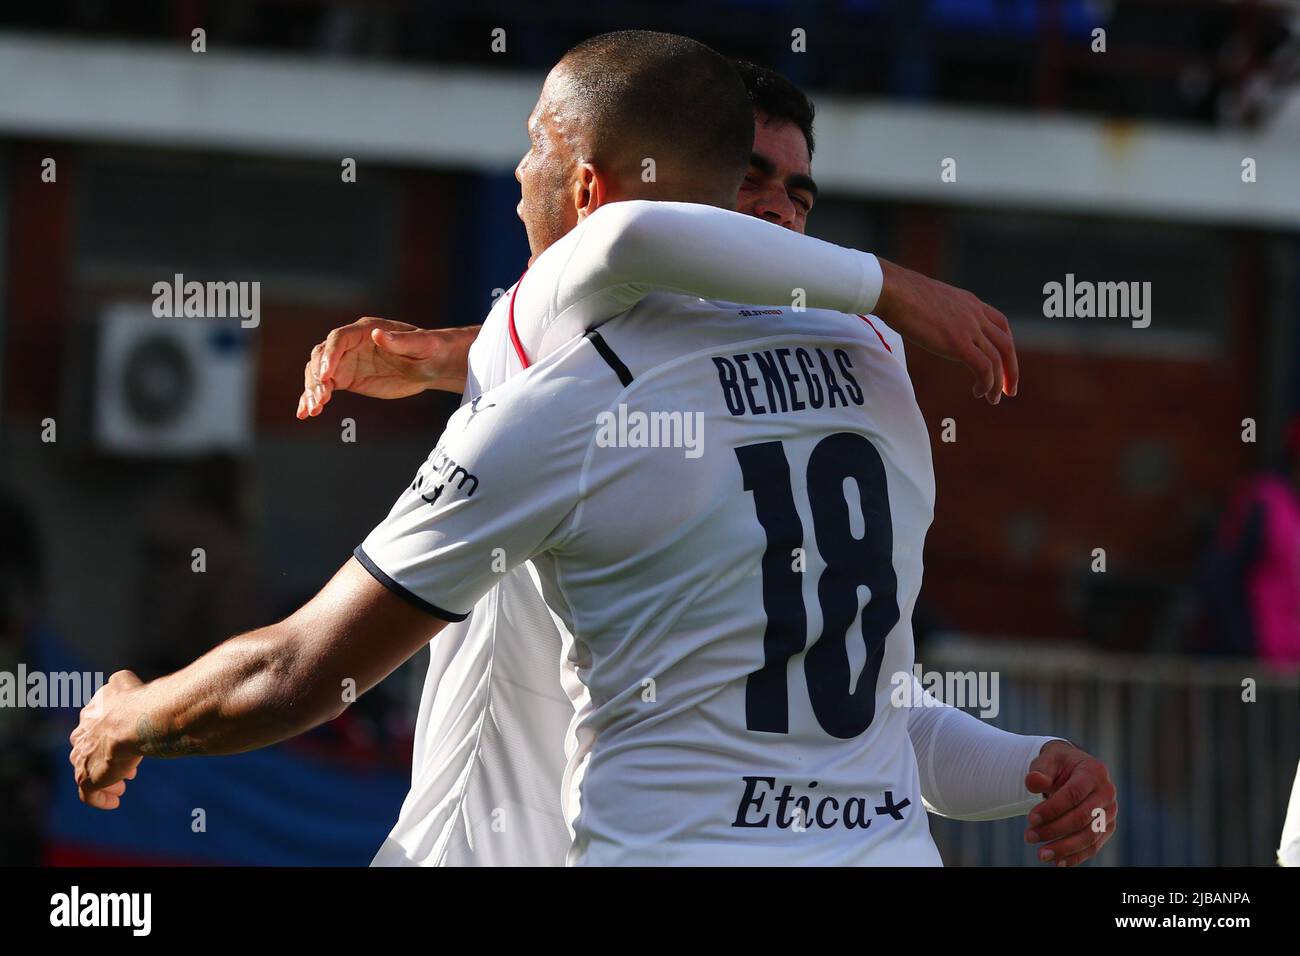 BUENOS AIRES, 06.06.2022: San Lorenzo and Independiente play for the first round of the Binance Cup of the Liga Profesional de Fútbol Stock Photo